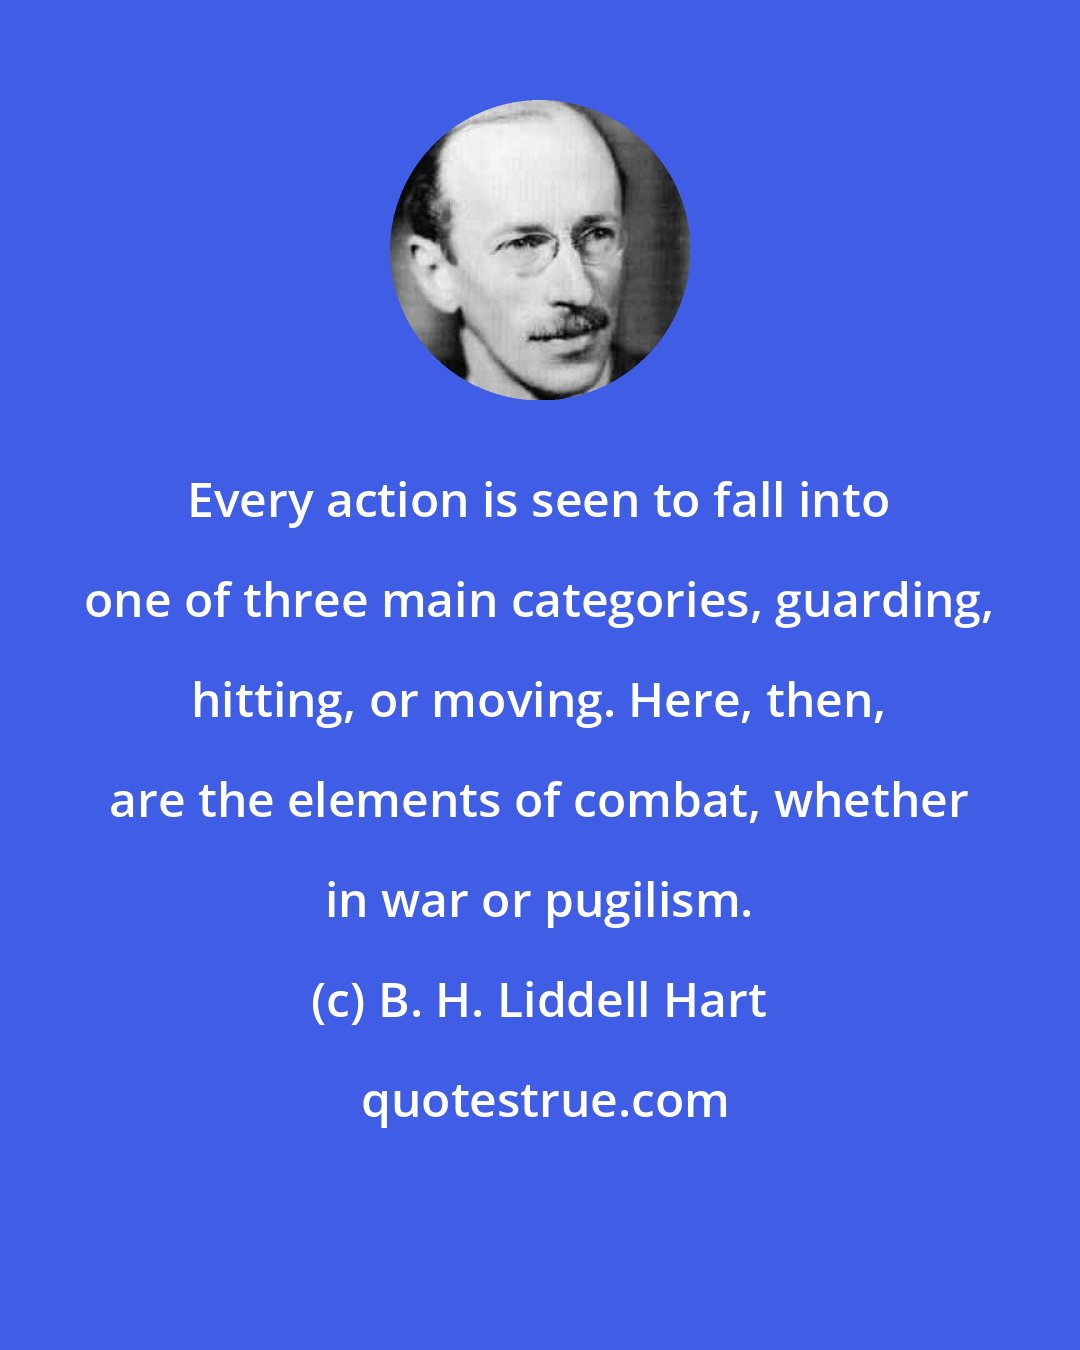 B. H. Liddell Hart: Every action is seen to fall into one of three main categories, guarding, hitting, or moving. Here, then, are the elements of combat, whether in war or pugilism.